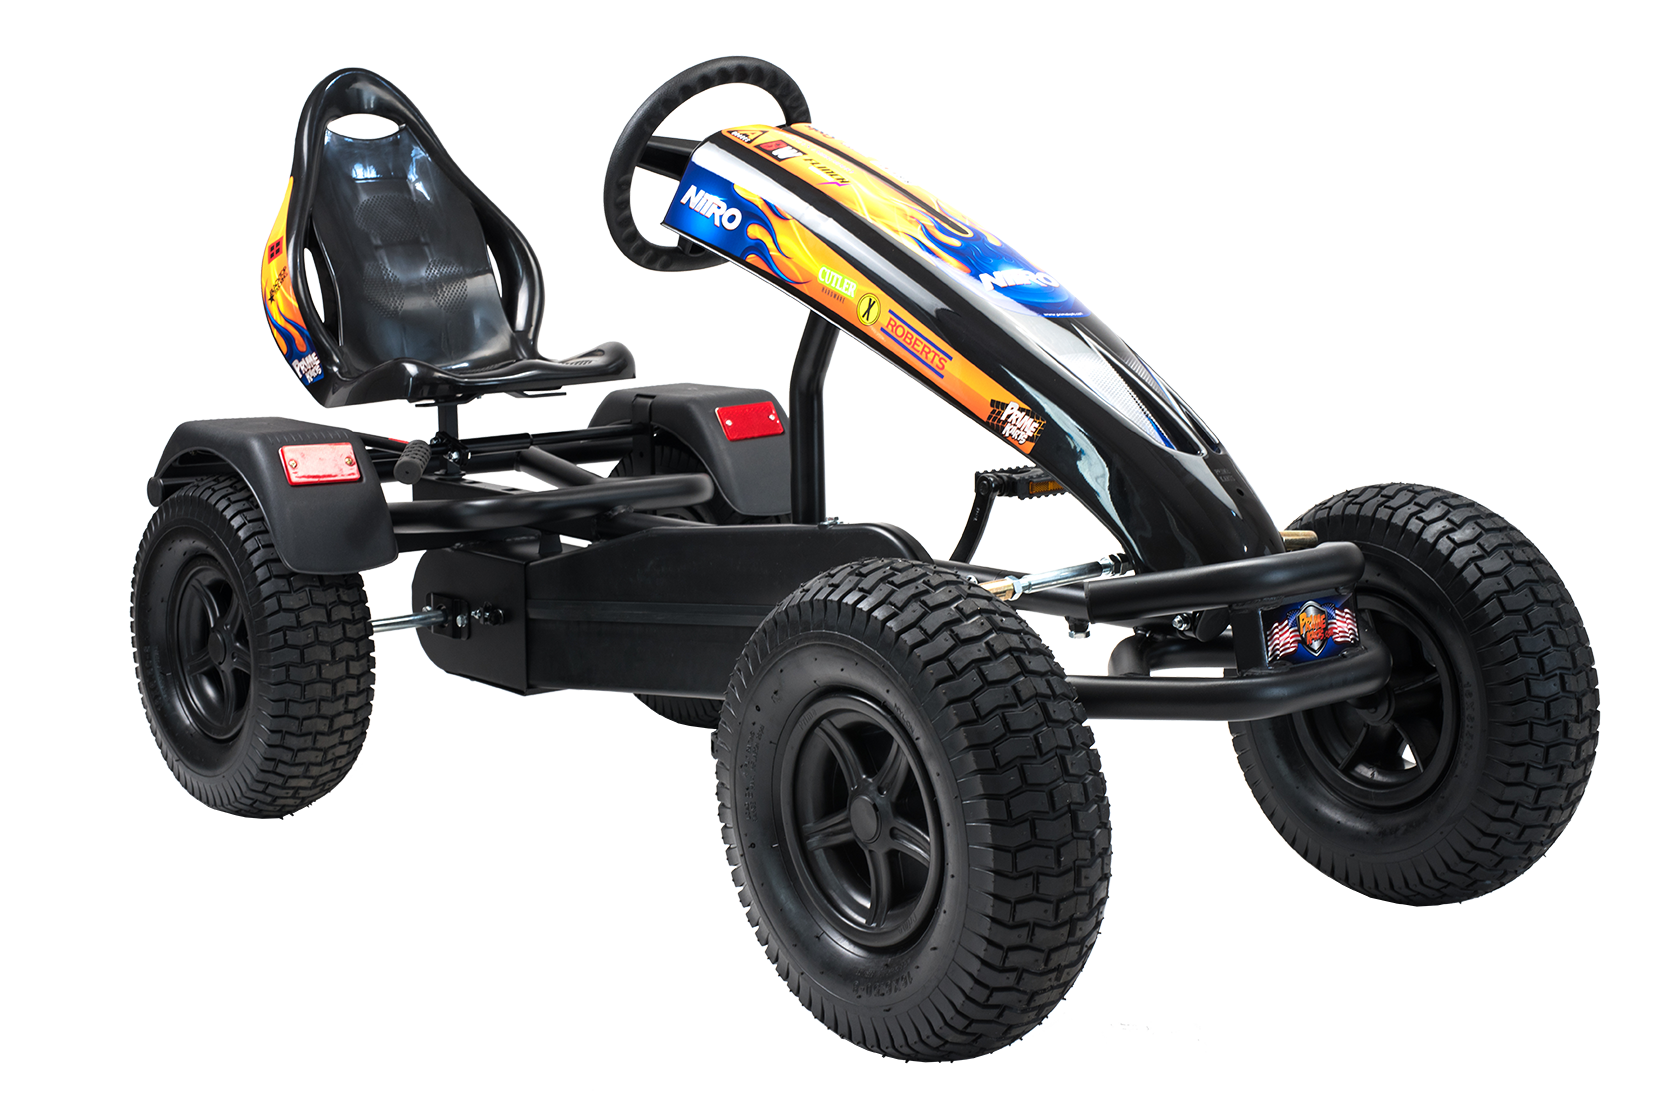 Racer Pedal Kart - Commercial Recreation Specialists